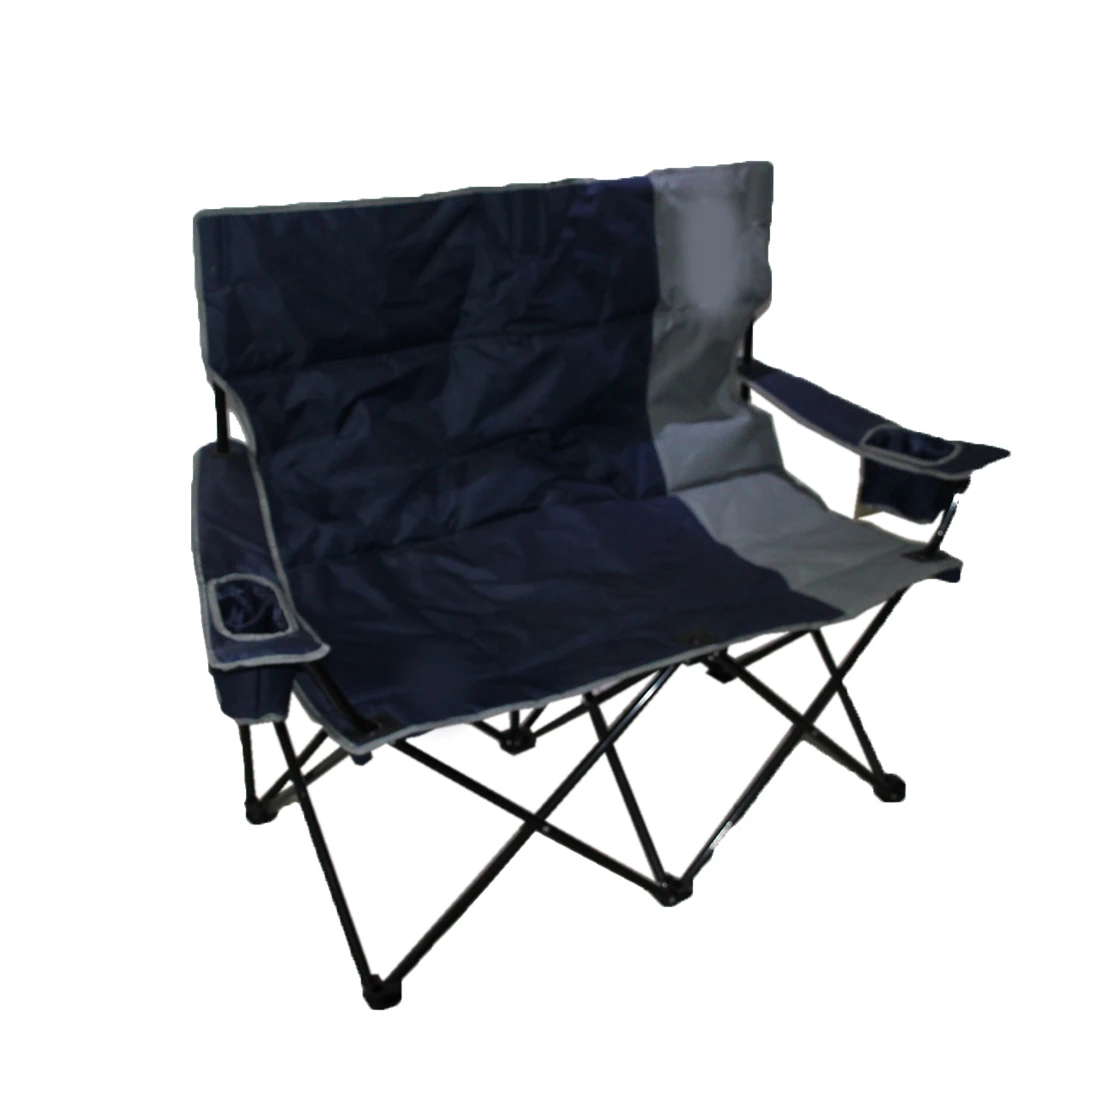 Outdoor Double Beach Chair Twin Couple Chair Use Foldable Portable Camping Hiking Chair For Two Person Love Seat Buy Dream Love Chair Waterproof Heavy Duty